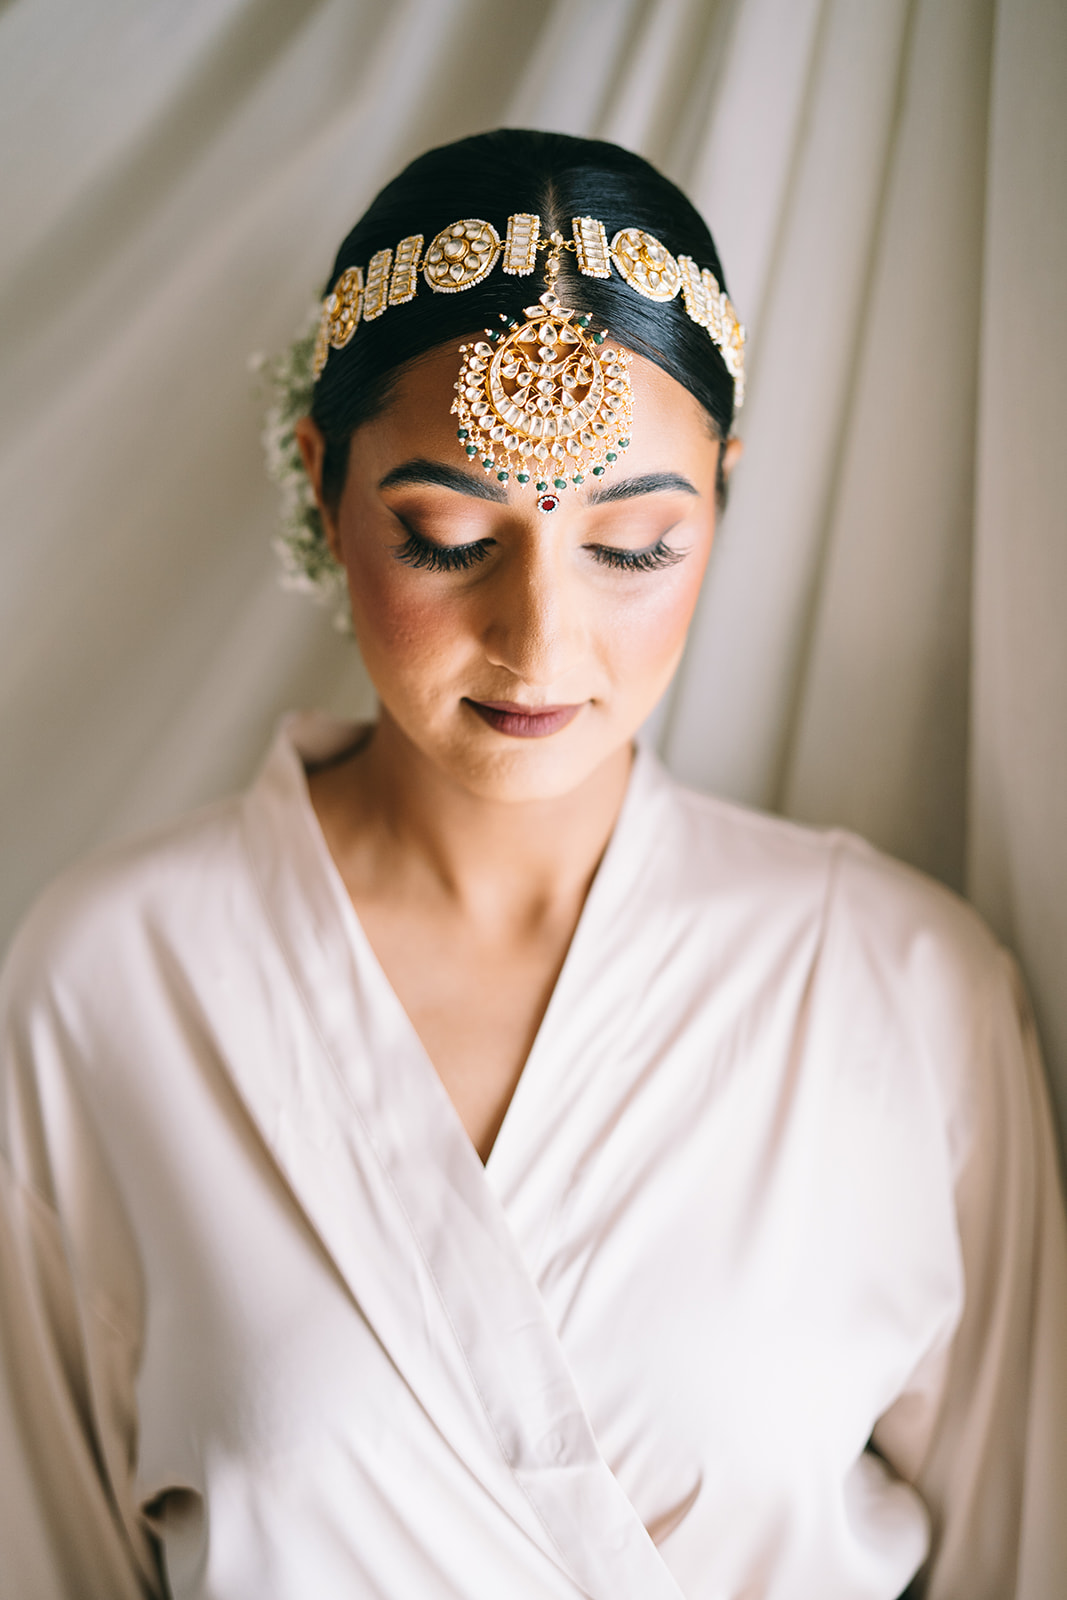 Bride in robe wearing full makeup and a golden headress looking down